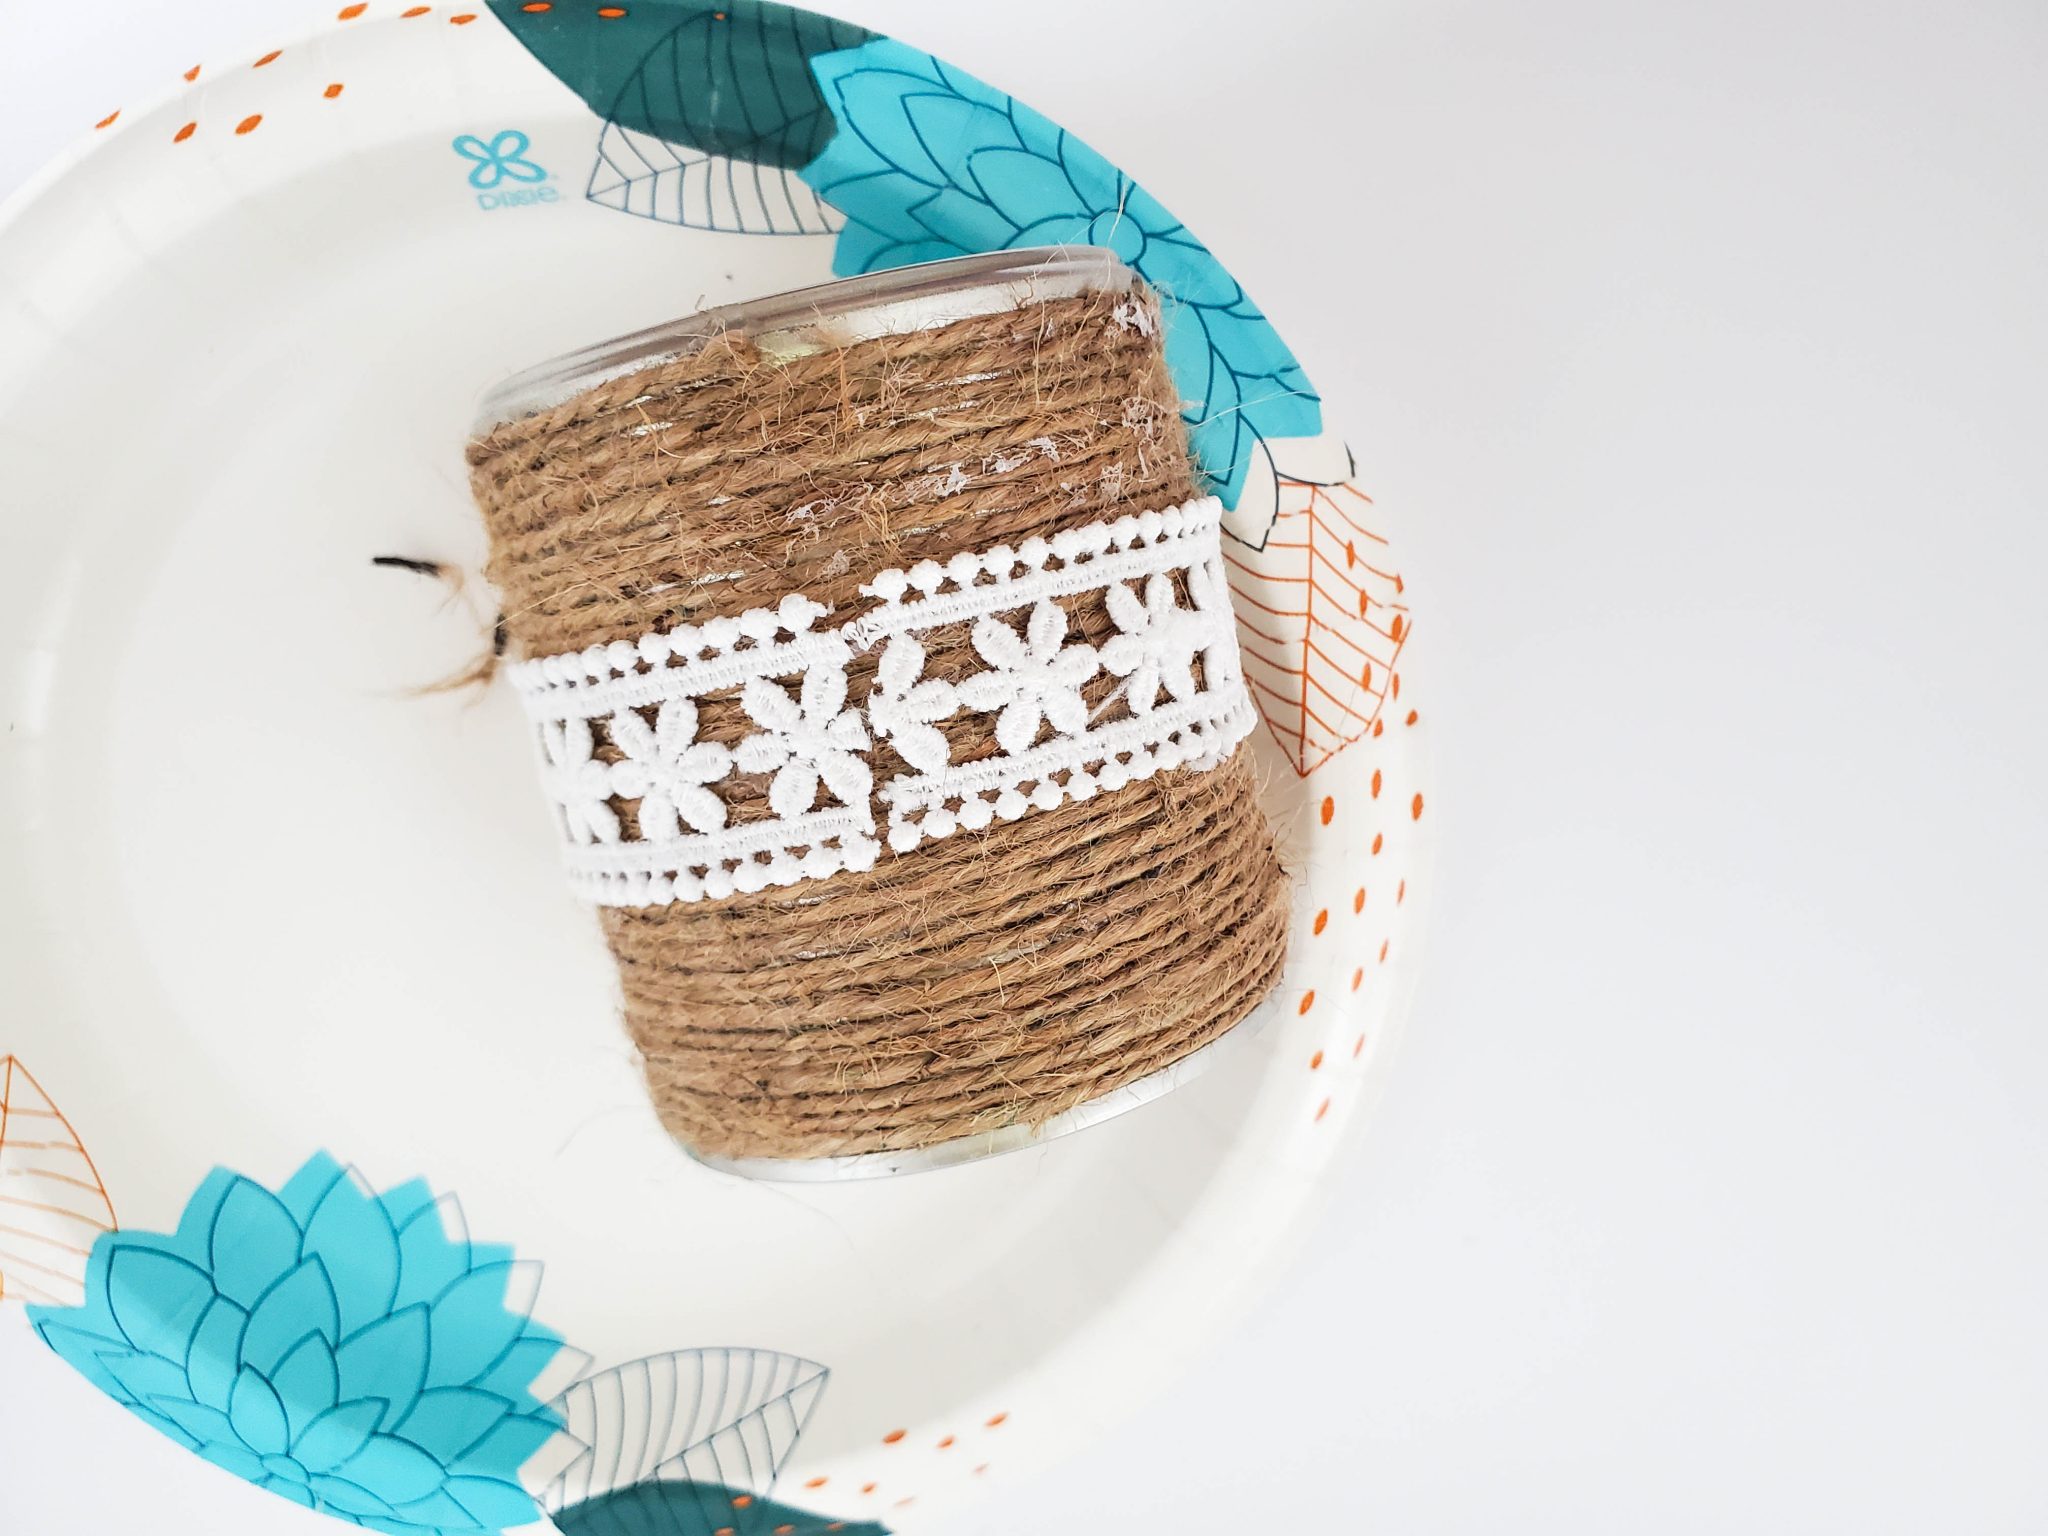 Upcycled can decorated with twine and lace